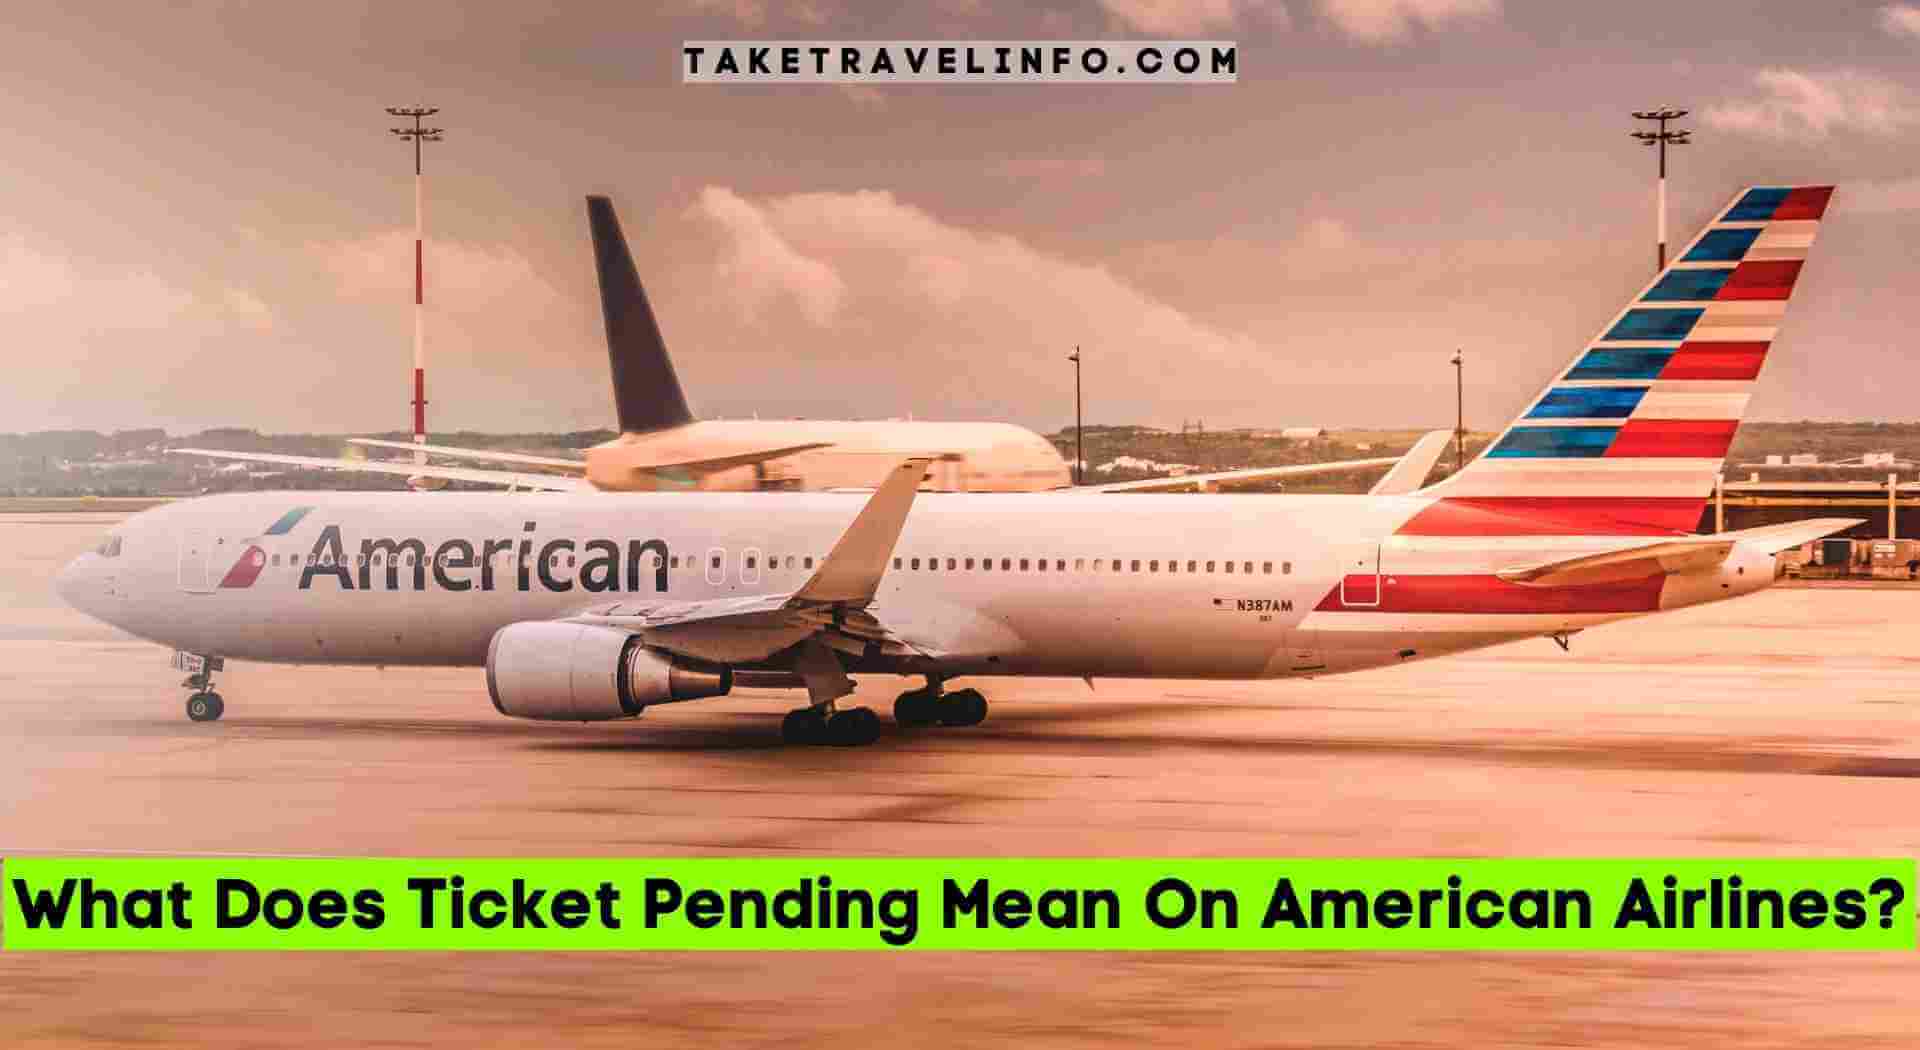 What Does Ticket Pending Mean On American Airlines